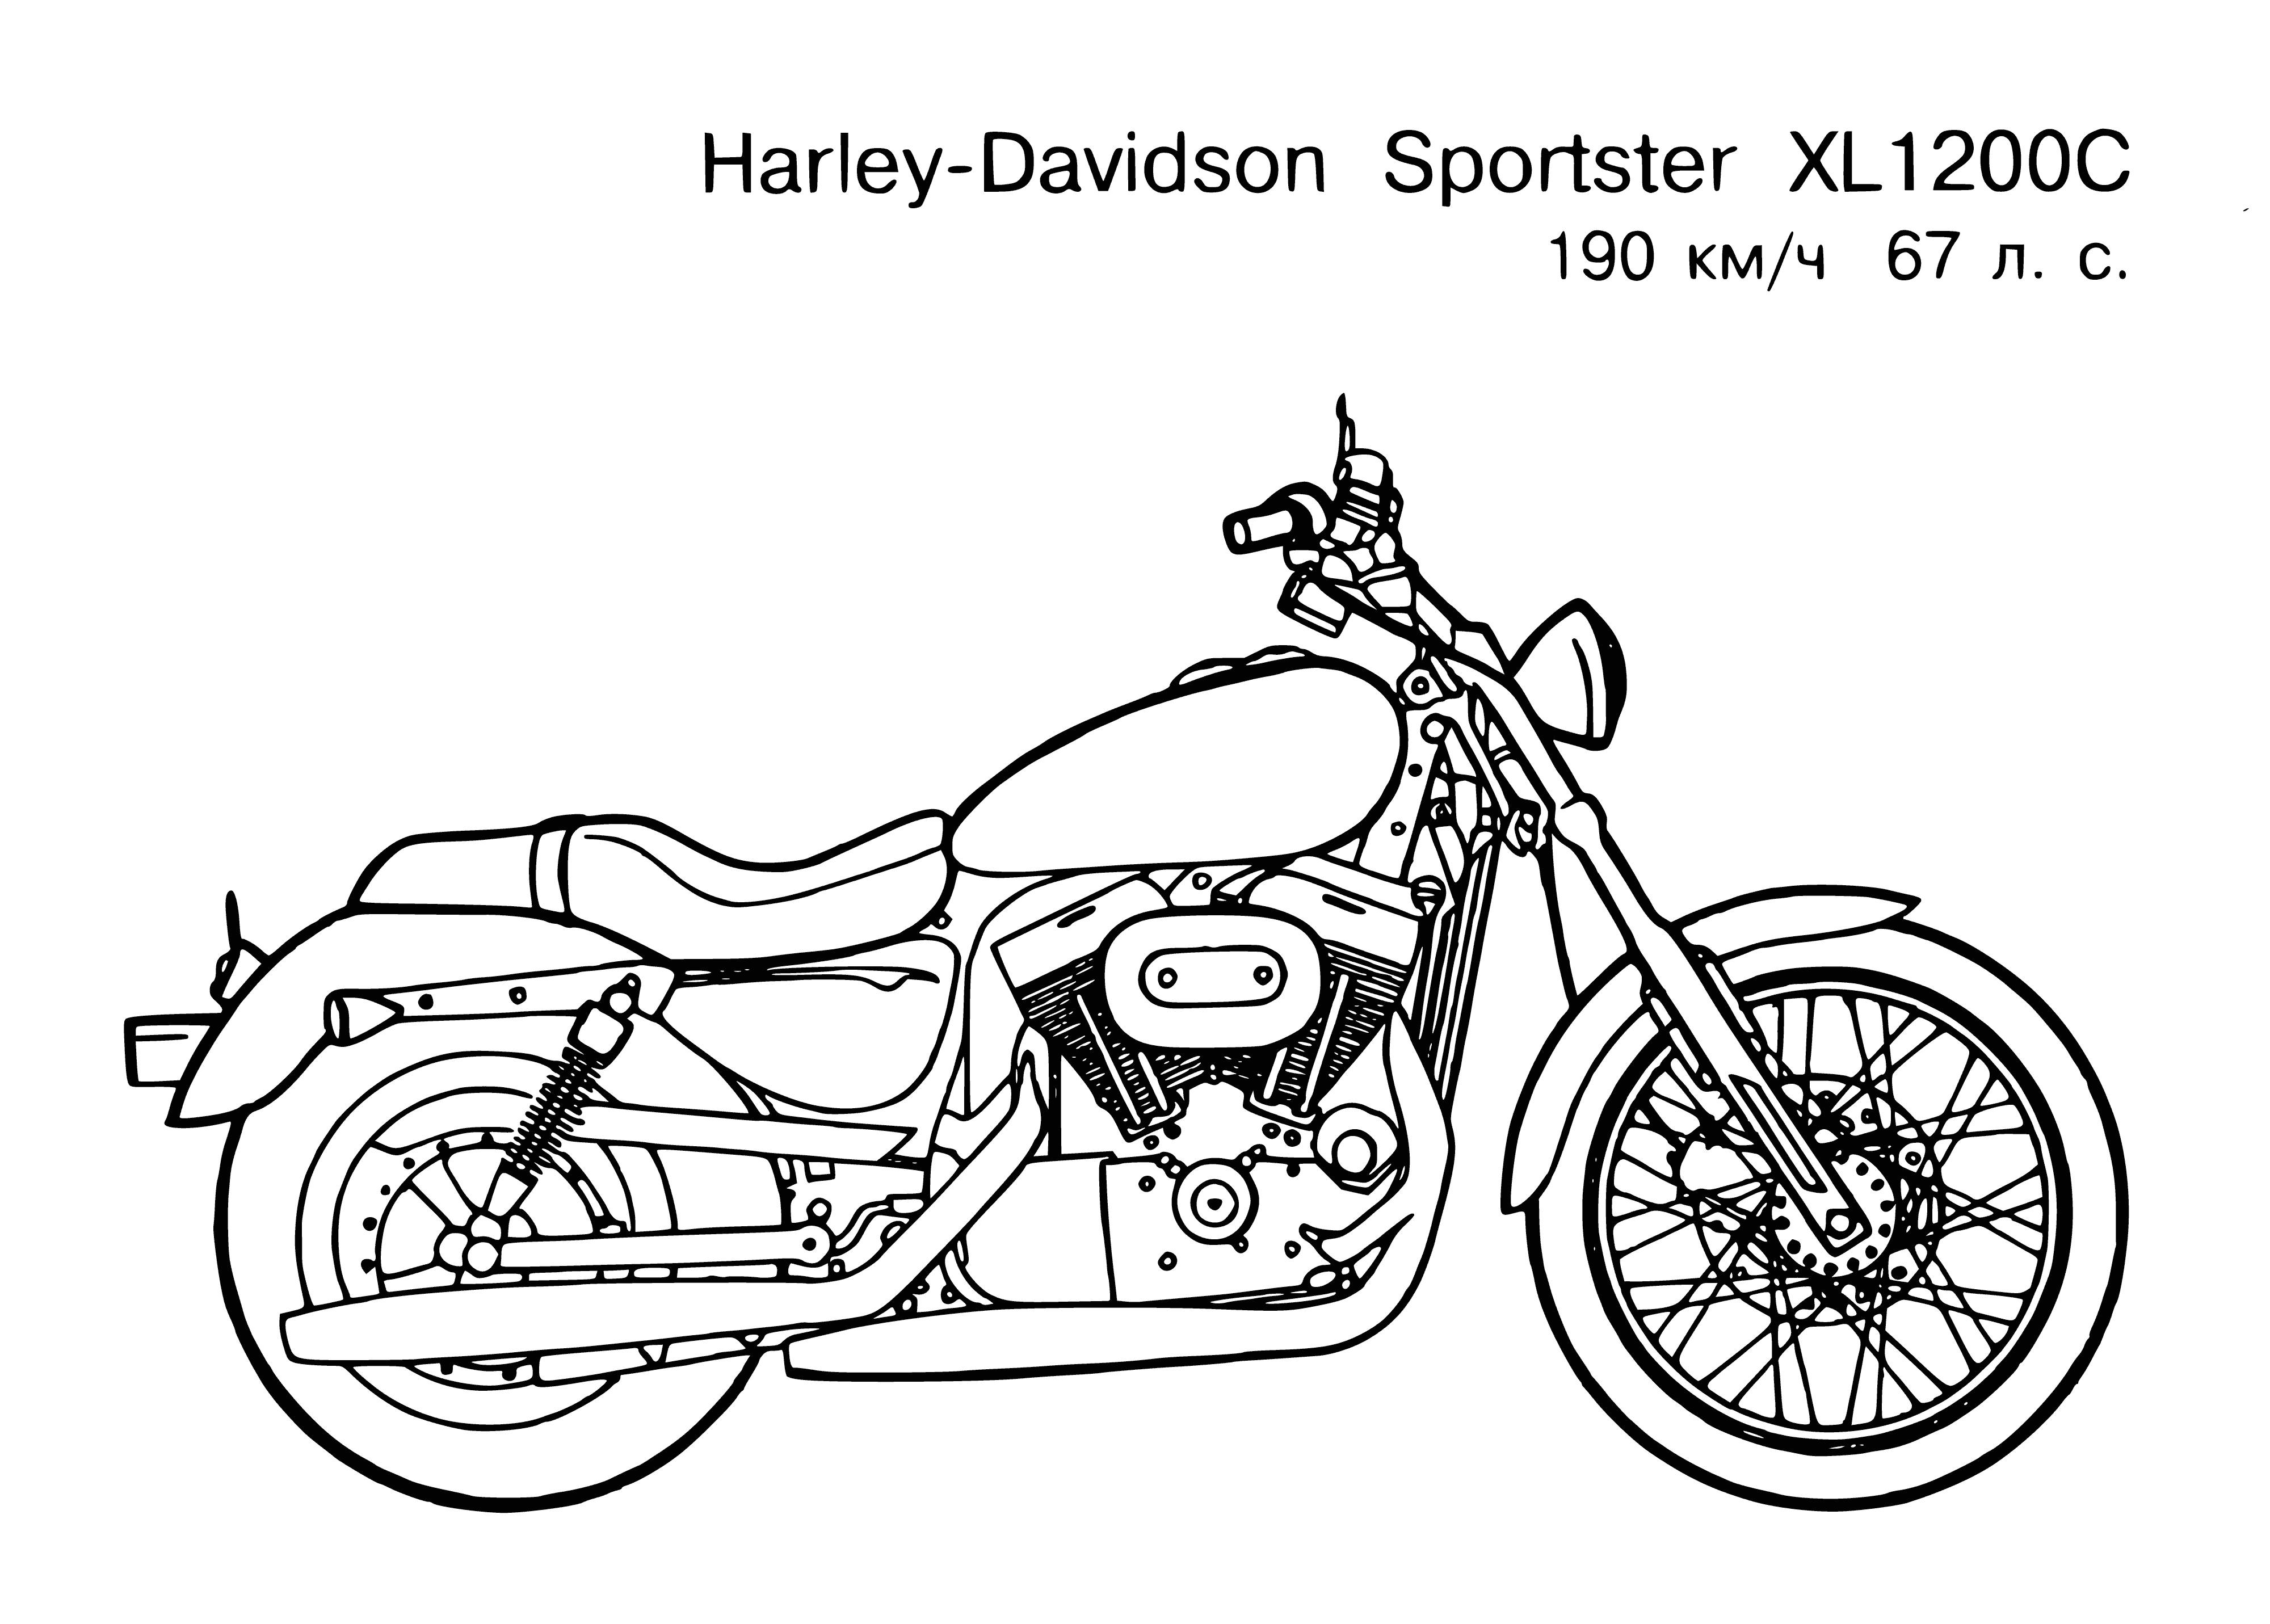 coloring page: Person driving a motorbike on a road wearing black helmet, hands on handlebars.